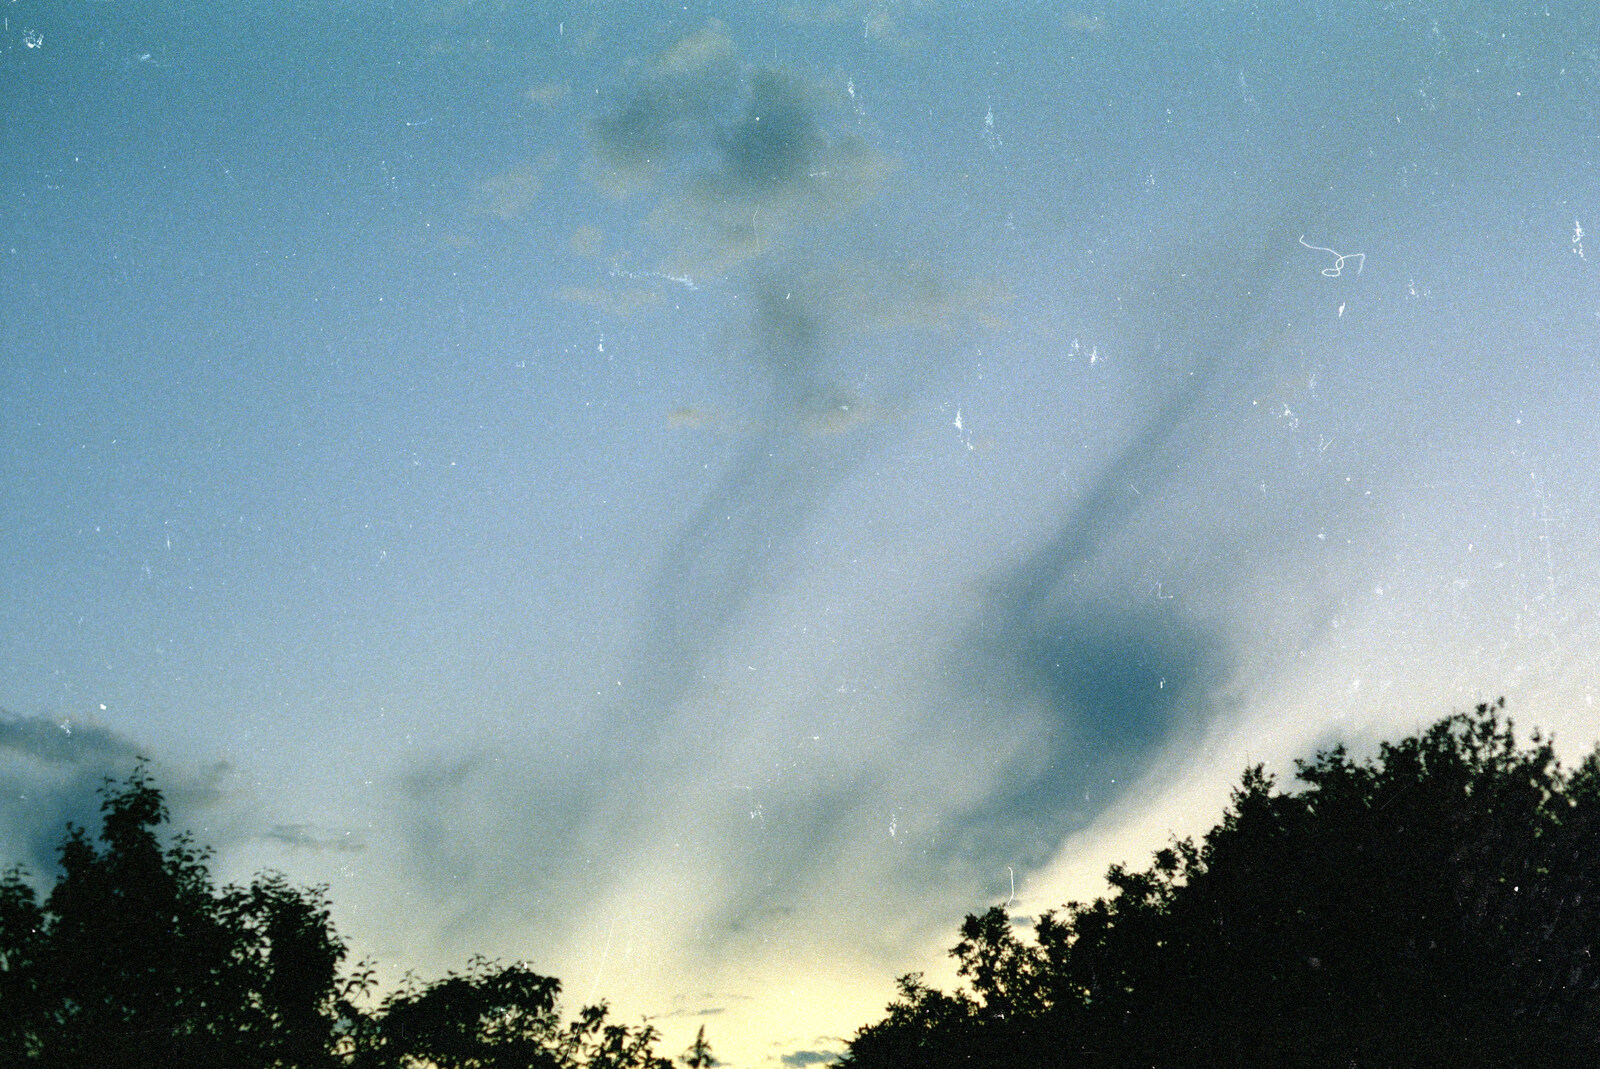 Wispy clouds from A CB Wedding and a Derelict Railway, Hampshire - 20th July 1986